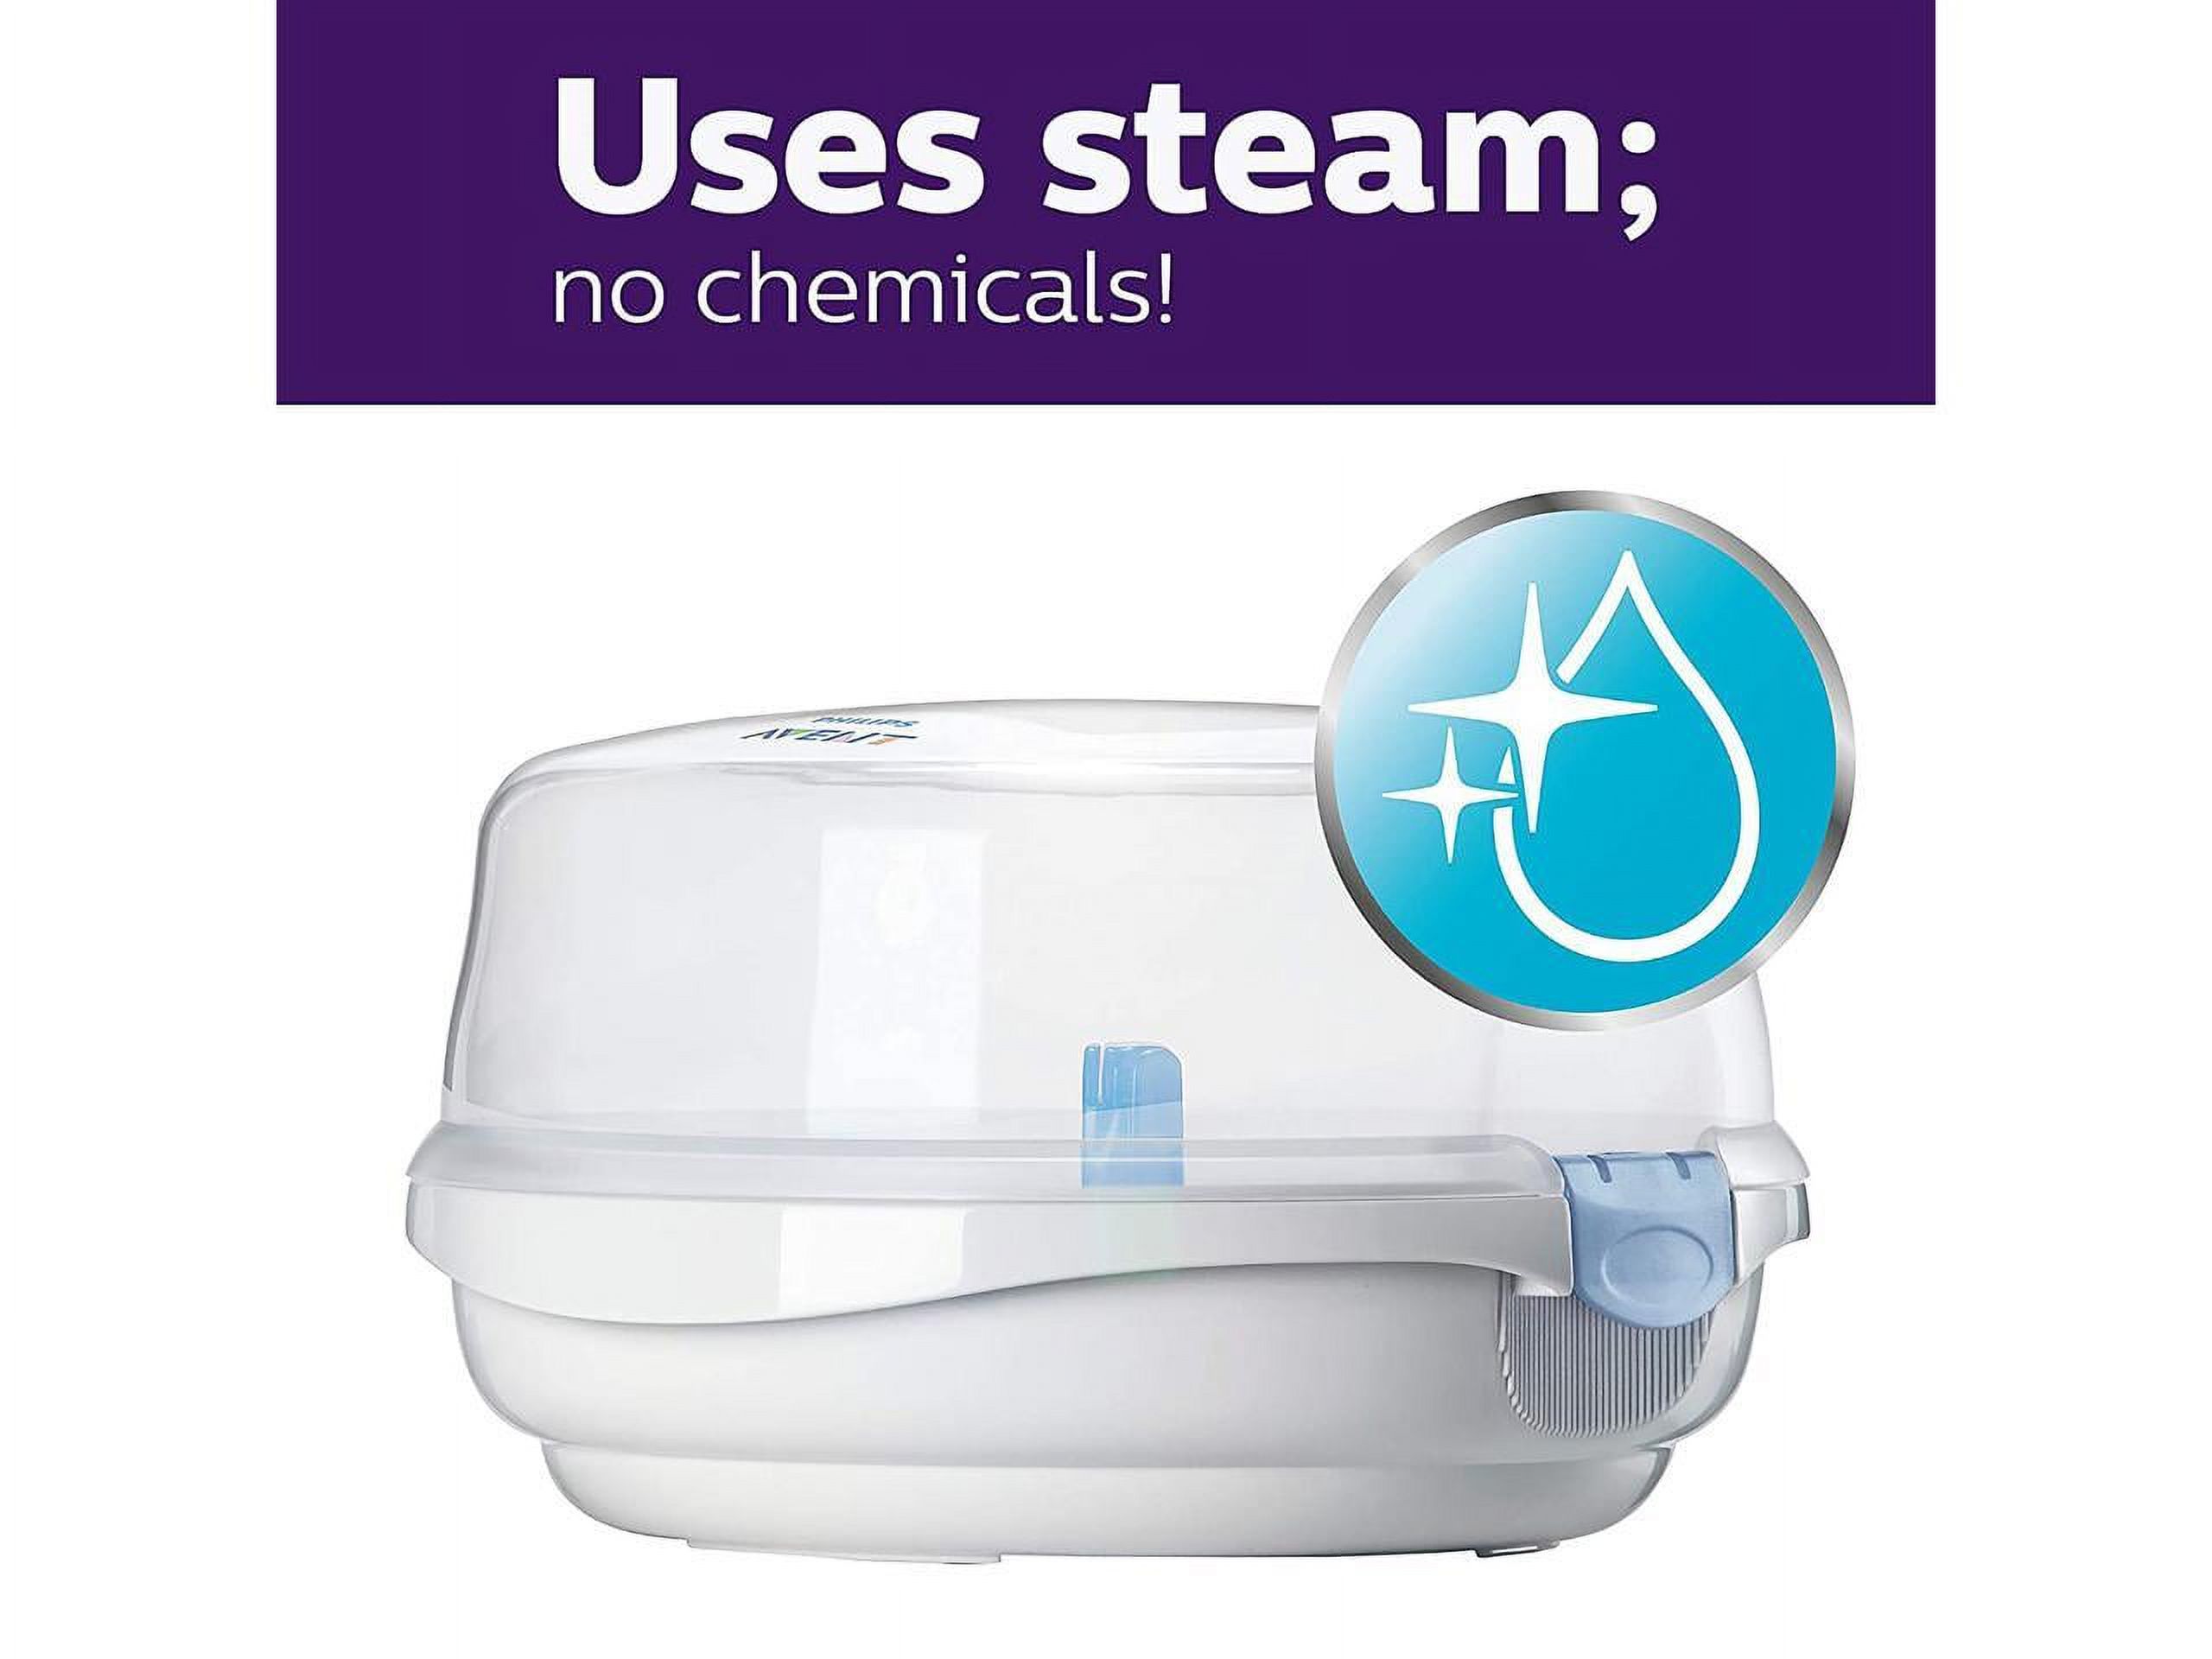 Philips AVENT Microwave Steam Sterilizer - image 3 of 5